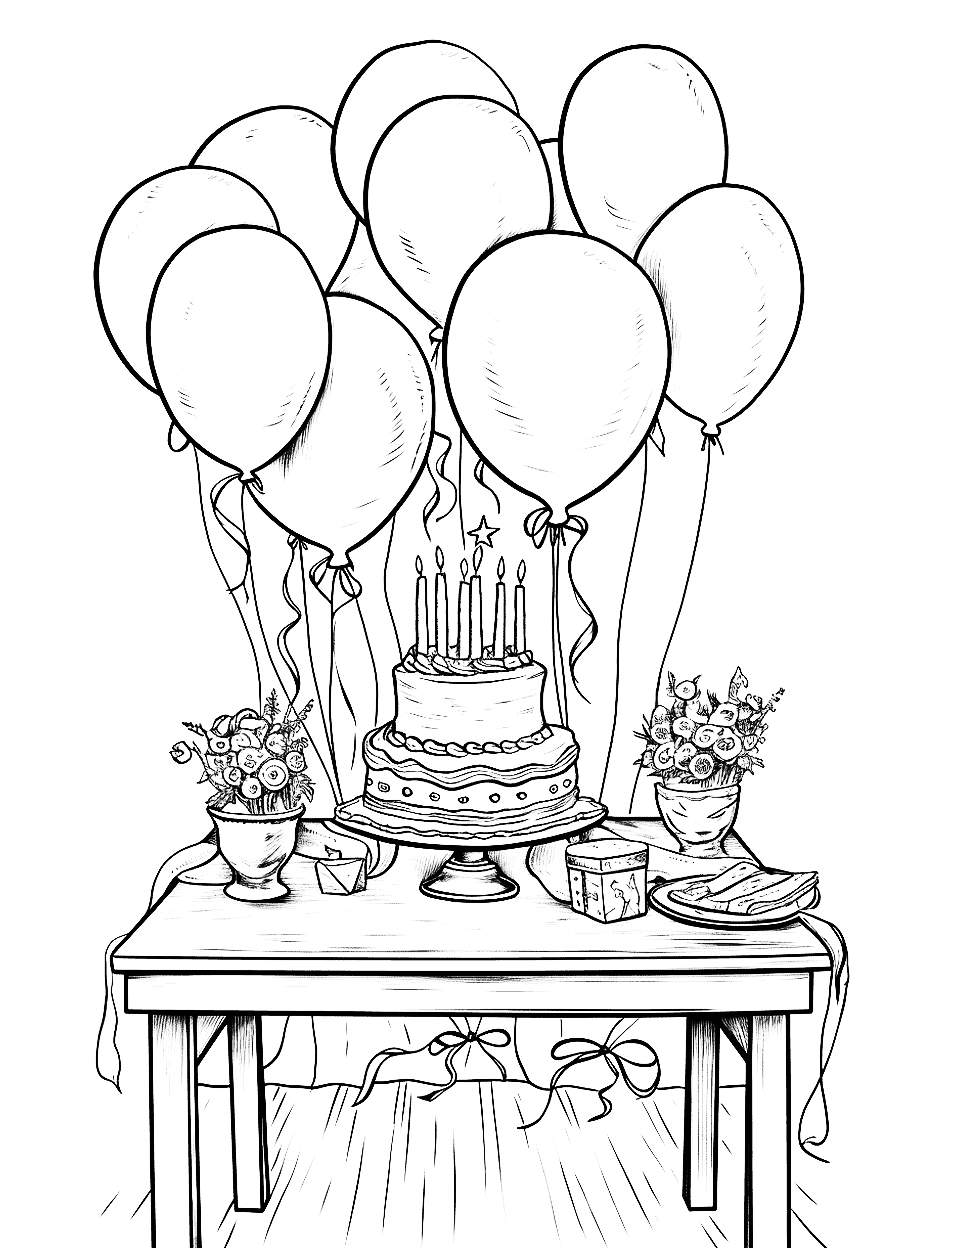 Birthday Surprise Adult Coloring Page - A table laid out with a cake, gifts, and balloons.